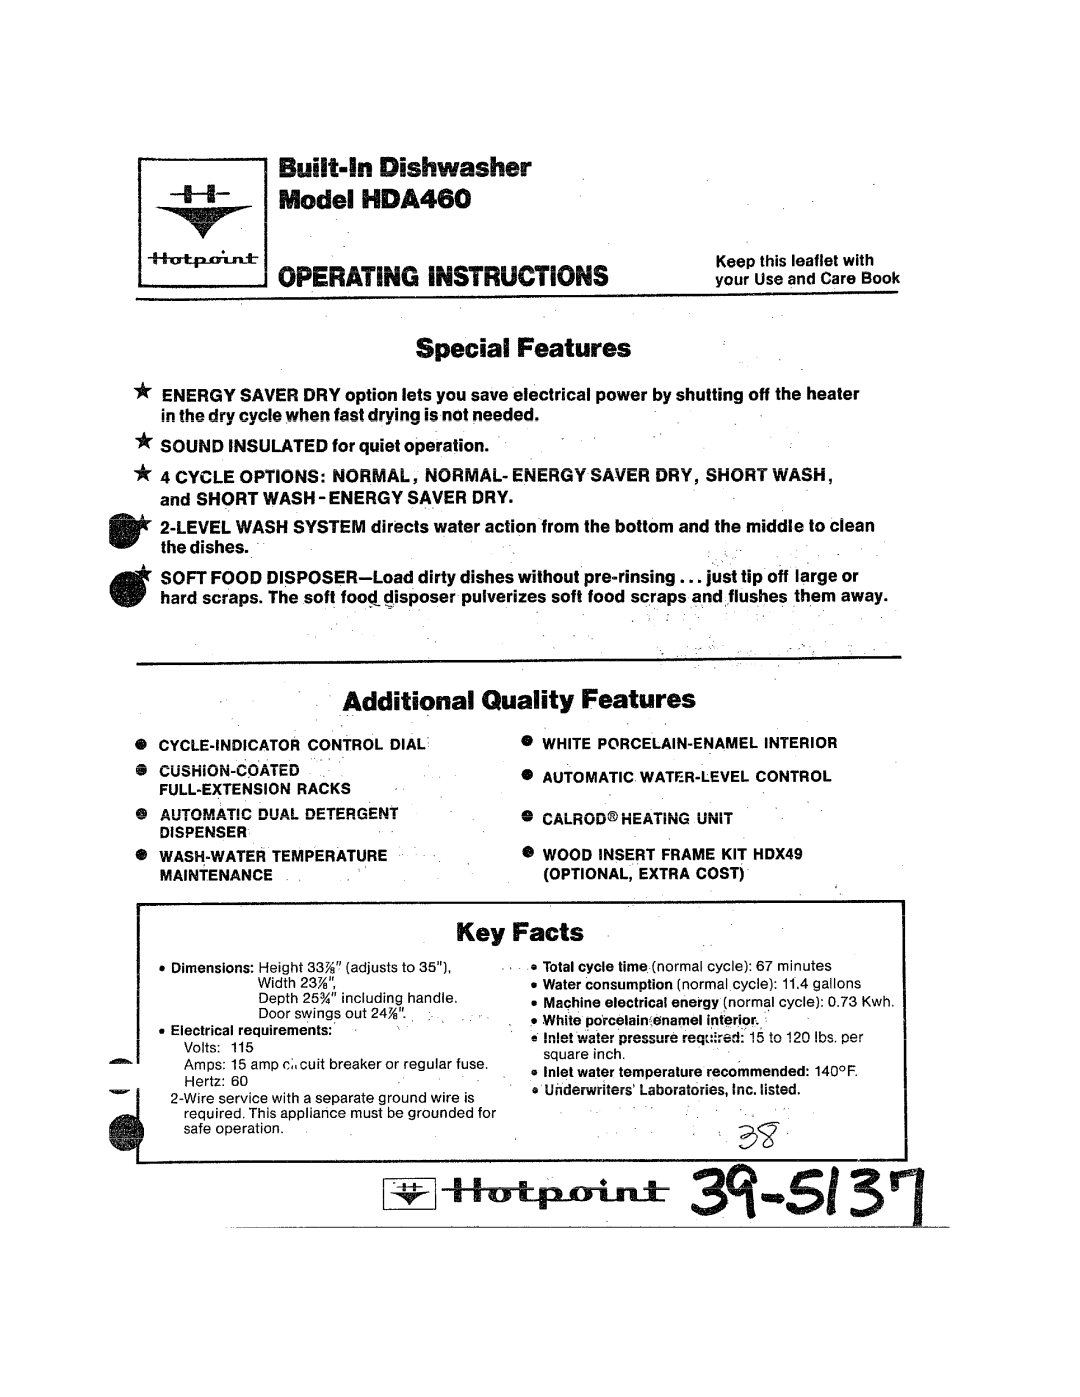 Hotpoint dimensions ModelHDA460, SpecialiFeatures, AdditionalQualityFeatures, Key Facts 